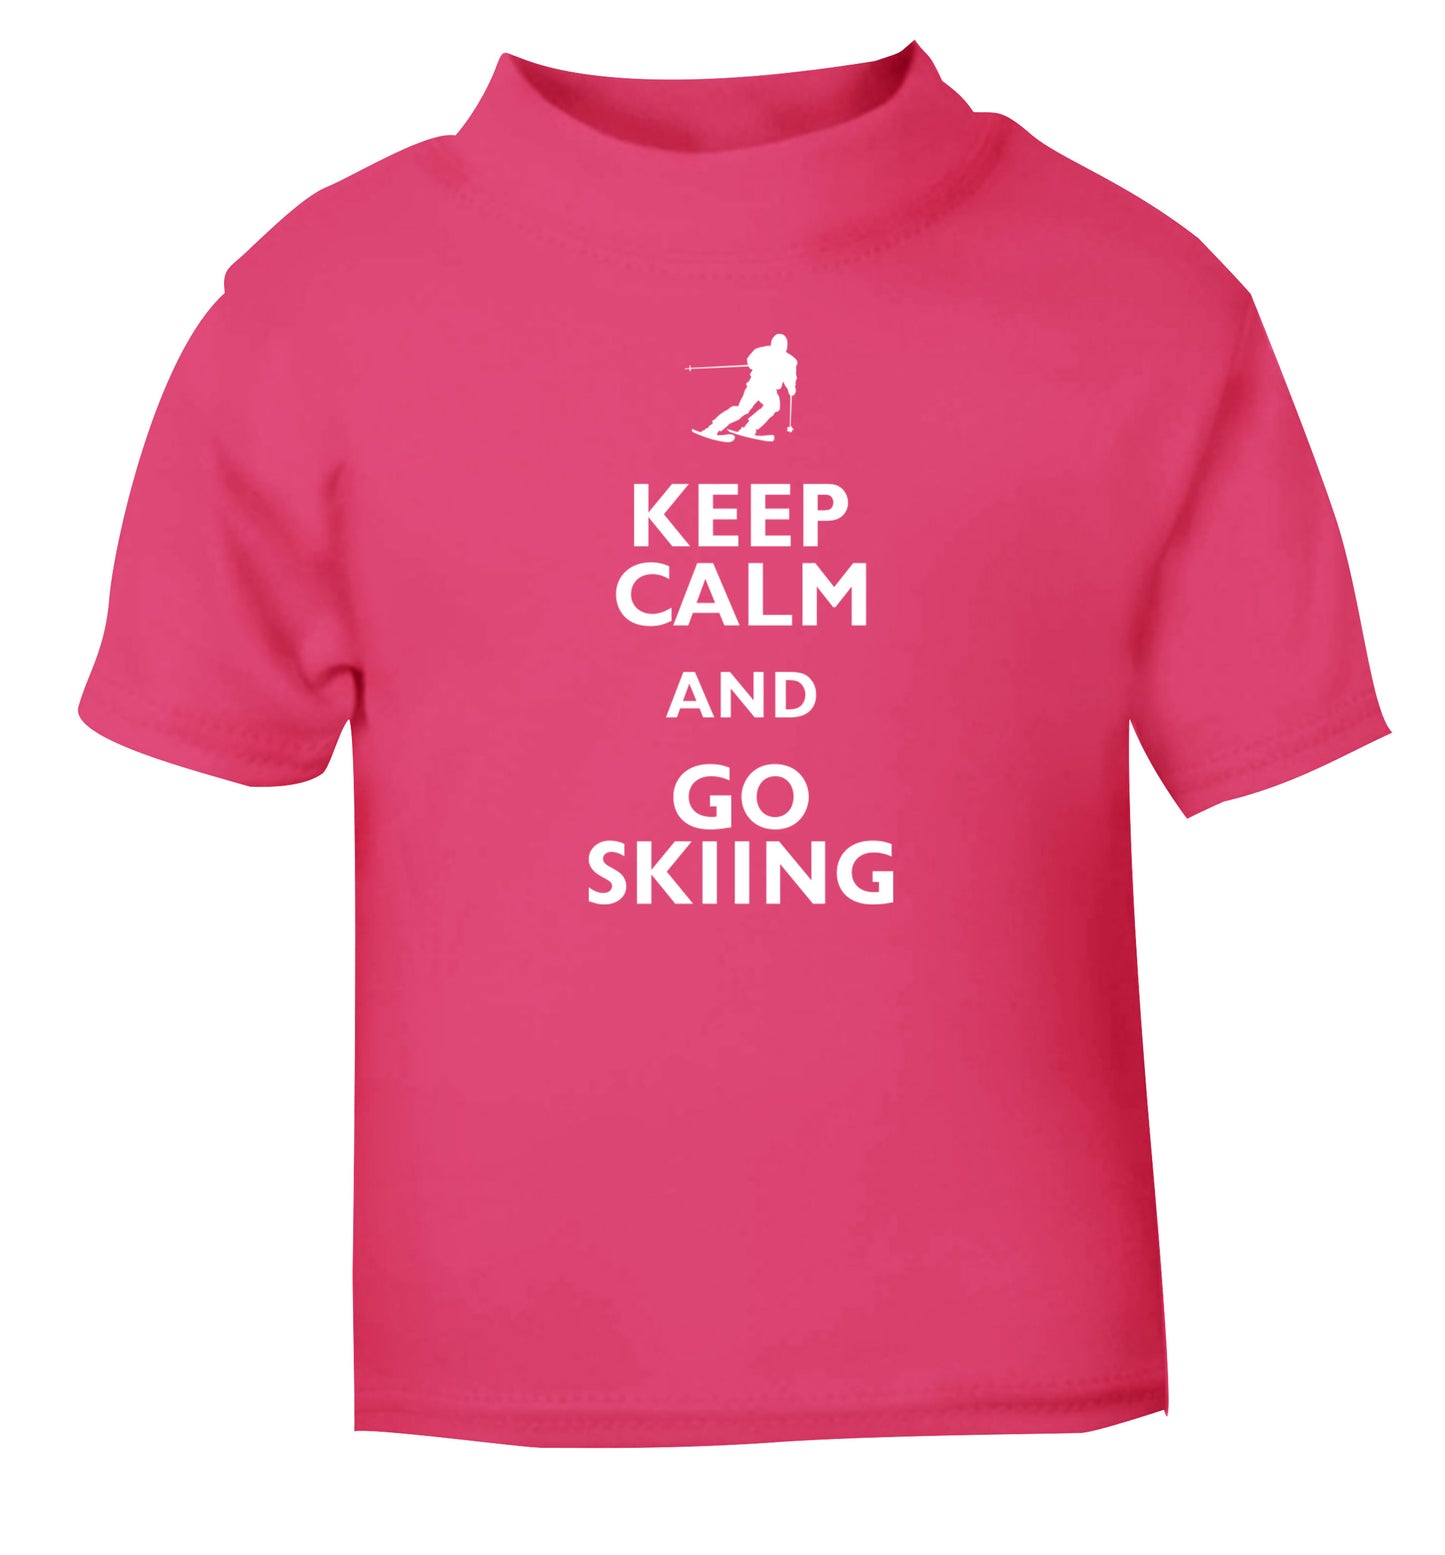 Keep calm and go skiing pink Baby Toddler Tshirt 2 Years